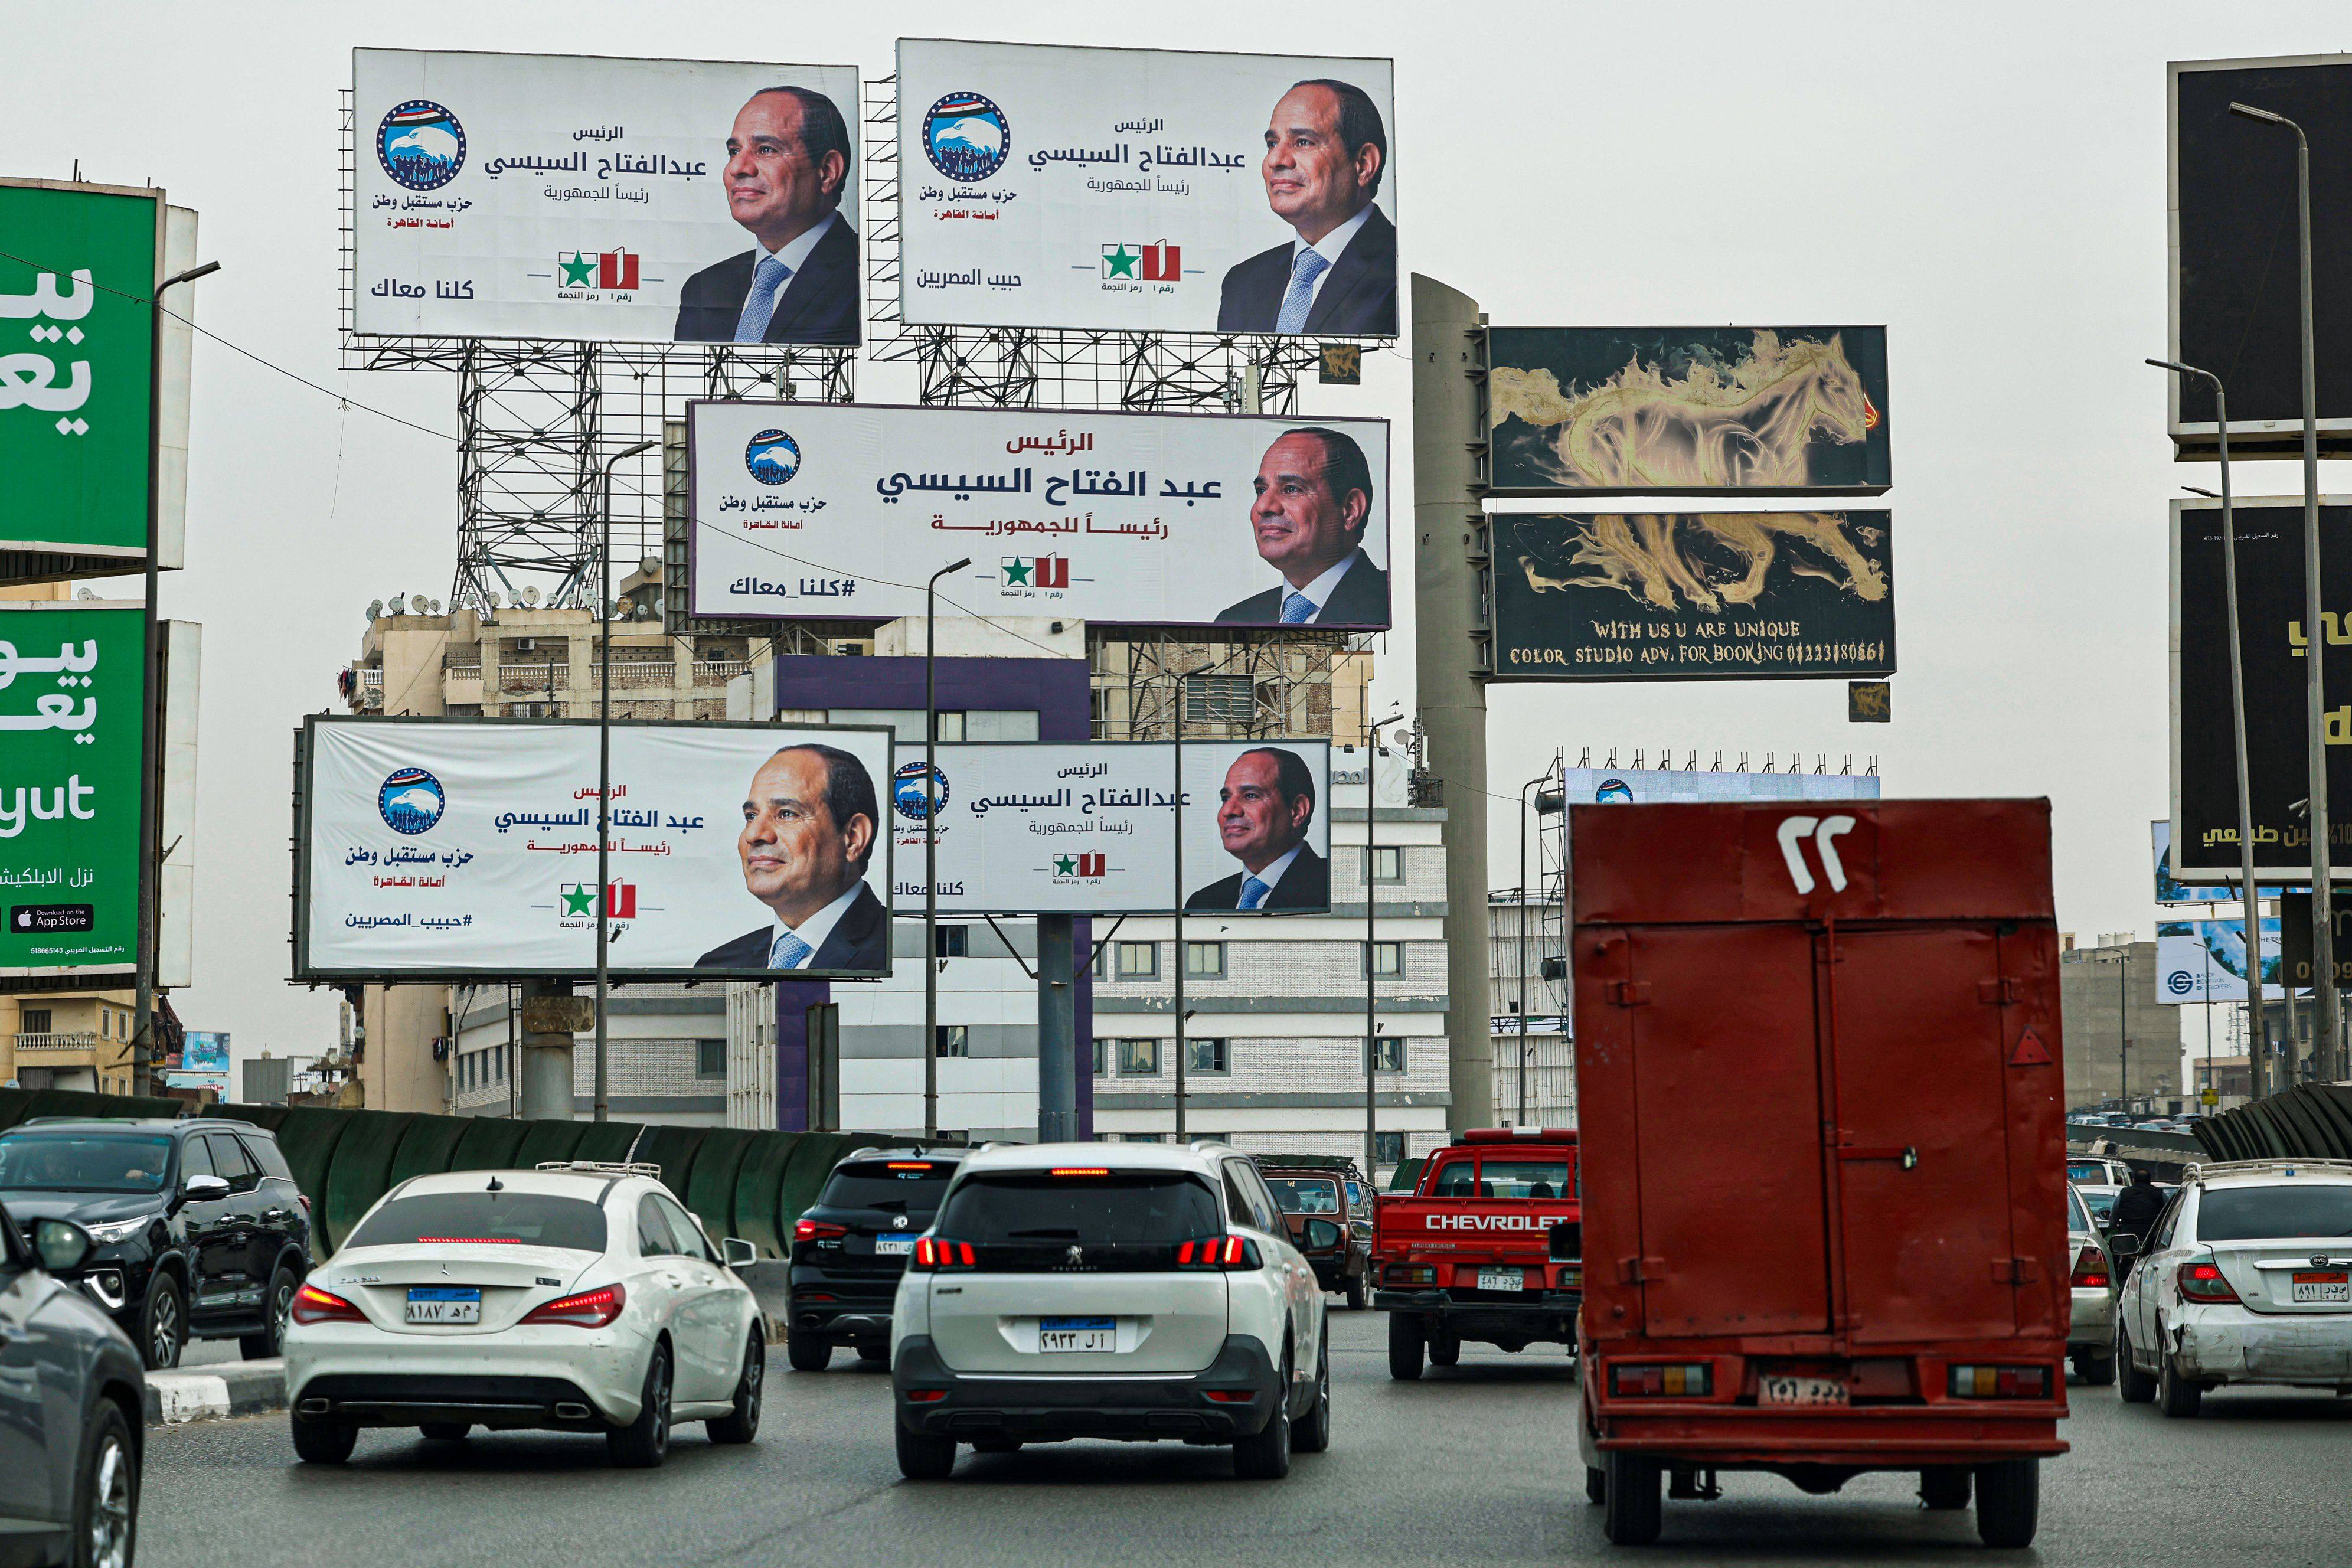 Campaign billboards for Egypt’s President Abdel-Fattah el-Sisi in Cairo, ahead of the country’s election. Photo: AFP